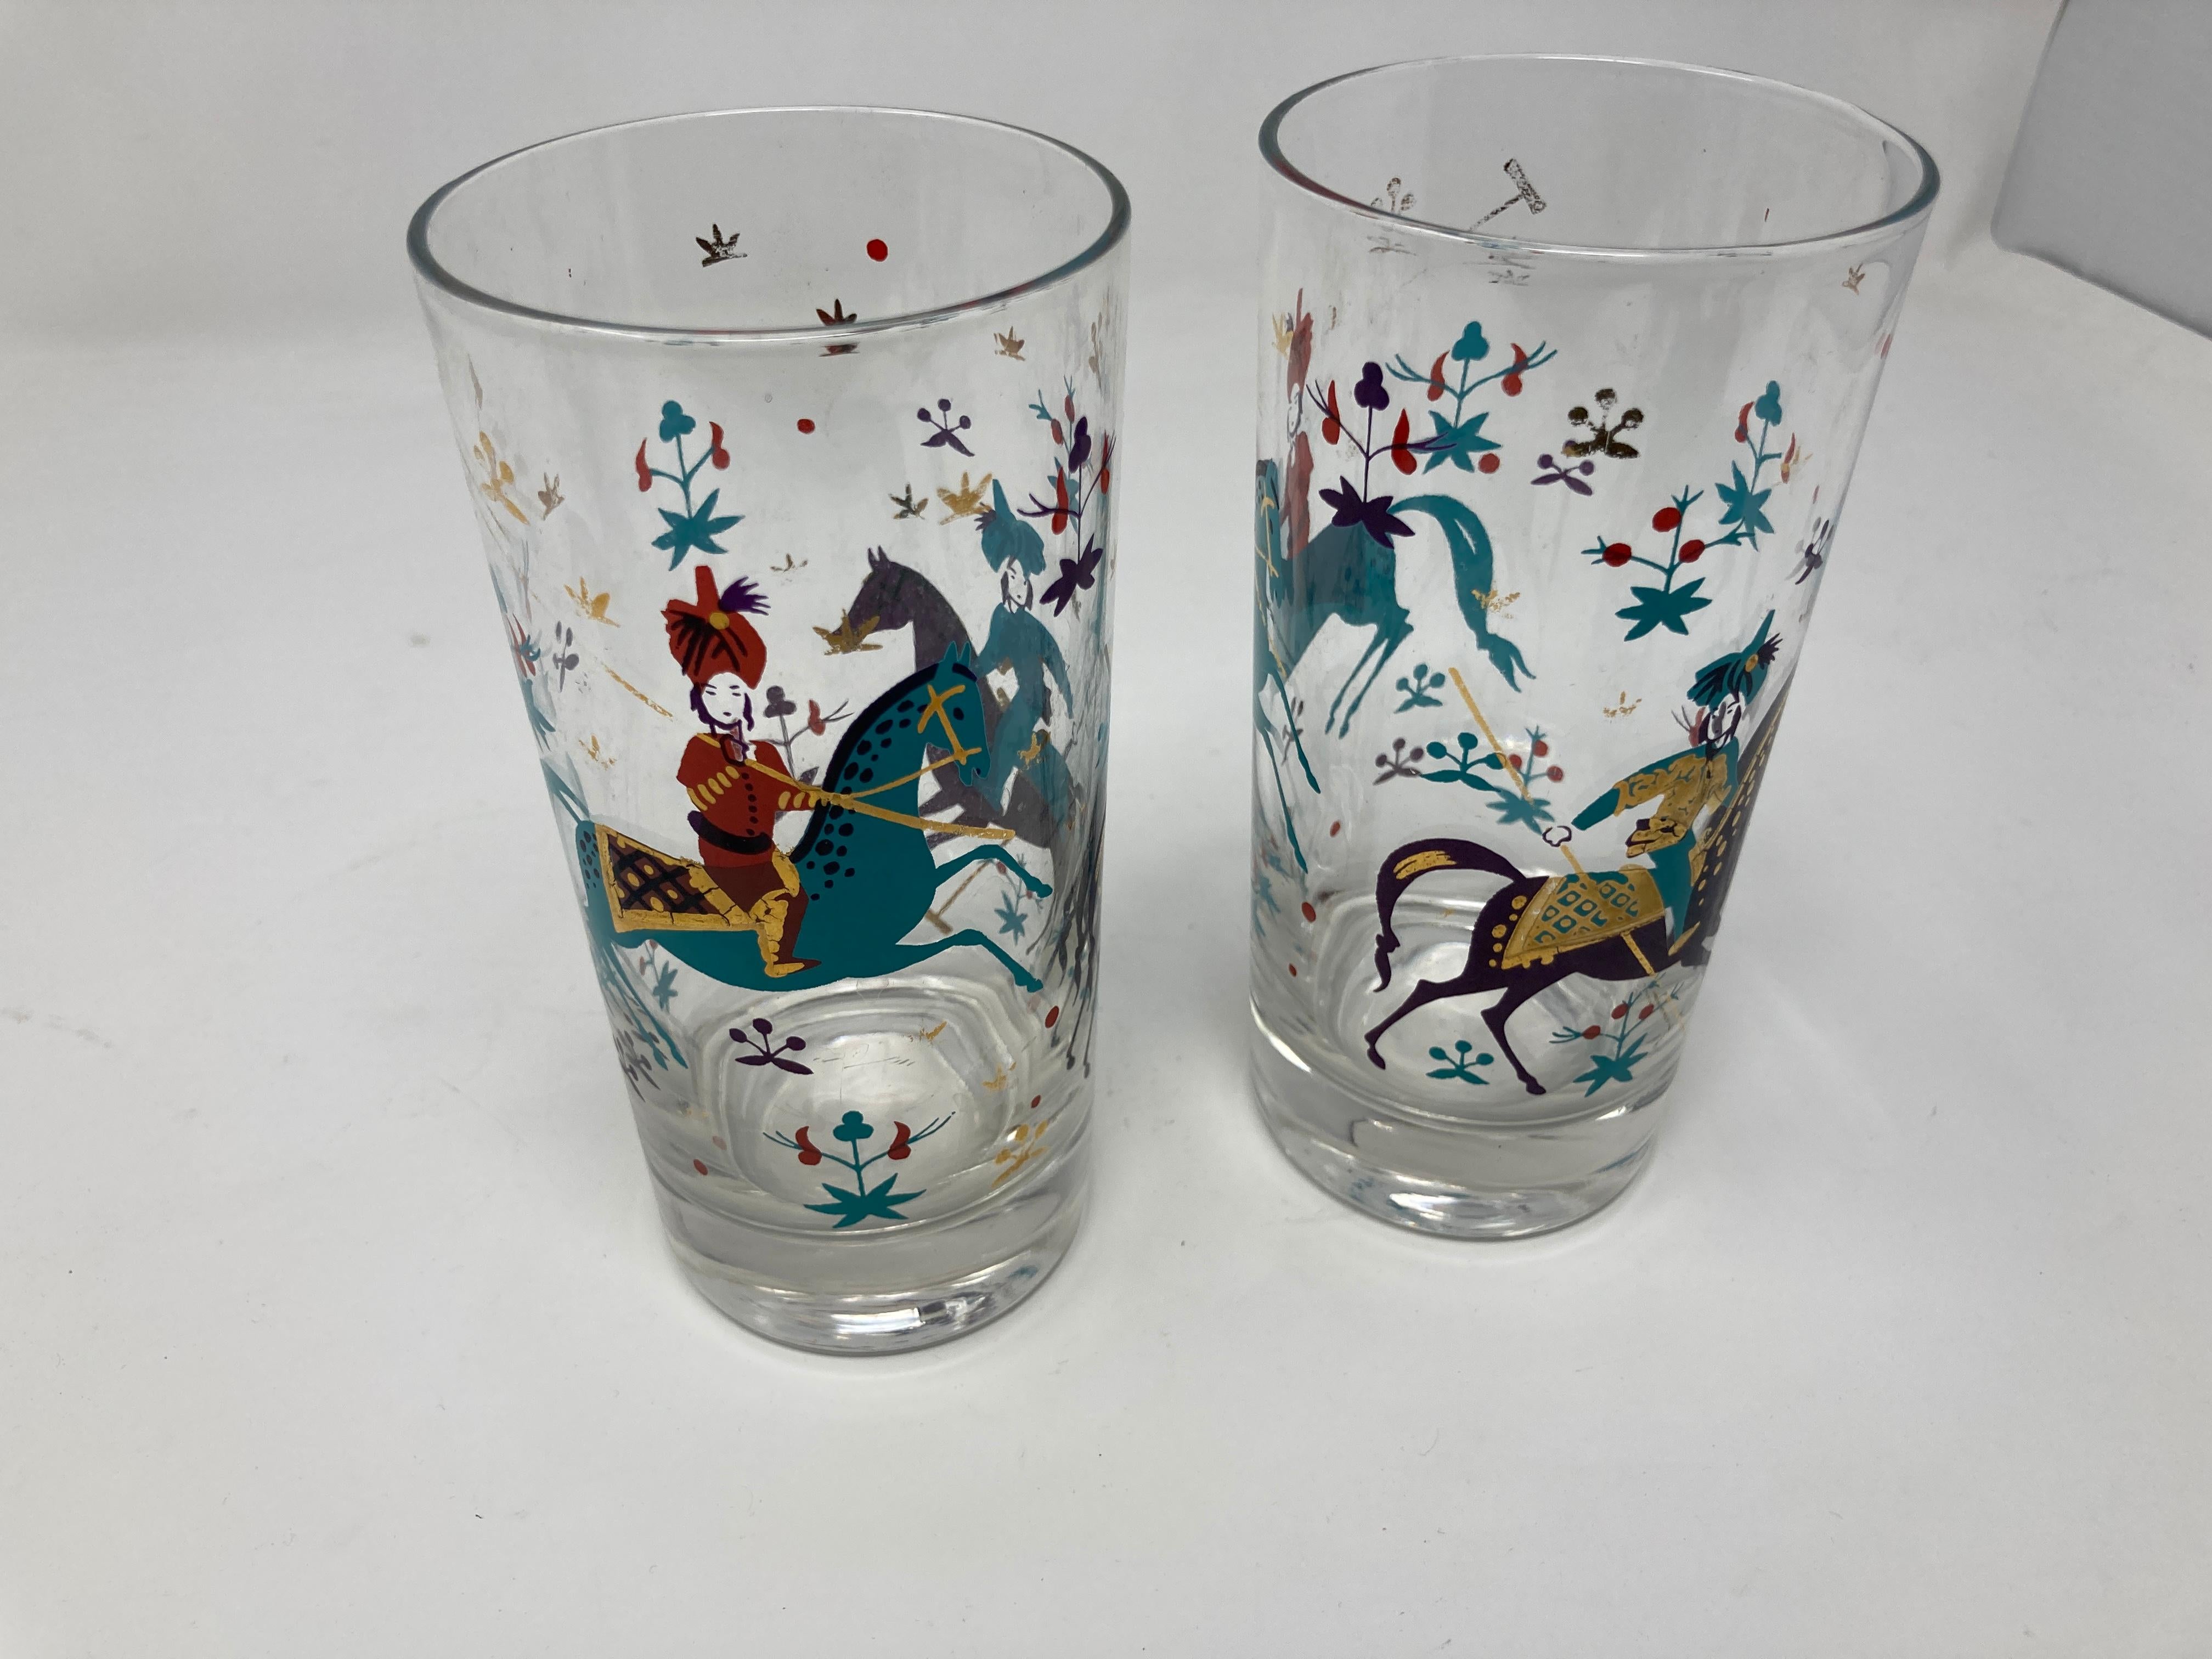 Elegant exquisite vintage set of two 50s-60s Turquoise and Gold Arabian Nights highball cocktail glasses.
A truly rare and unique set of Turquoise and gold decoration of Persian exotic polo players and their horses.
A hard to find pattern